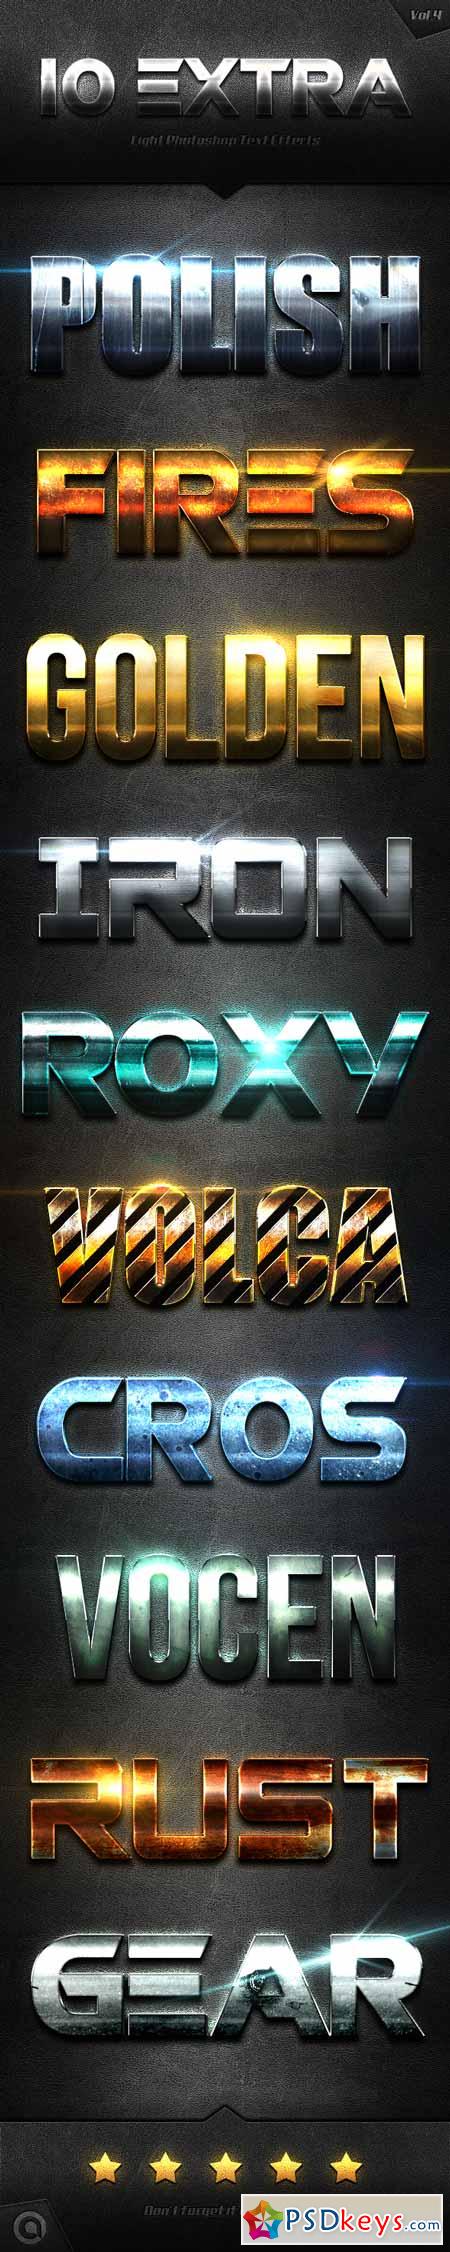 10 Extra Light Text Effects Vol.4 14469728